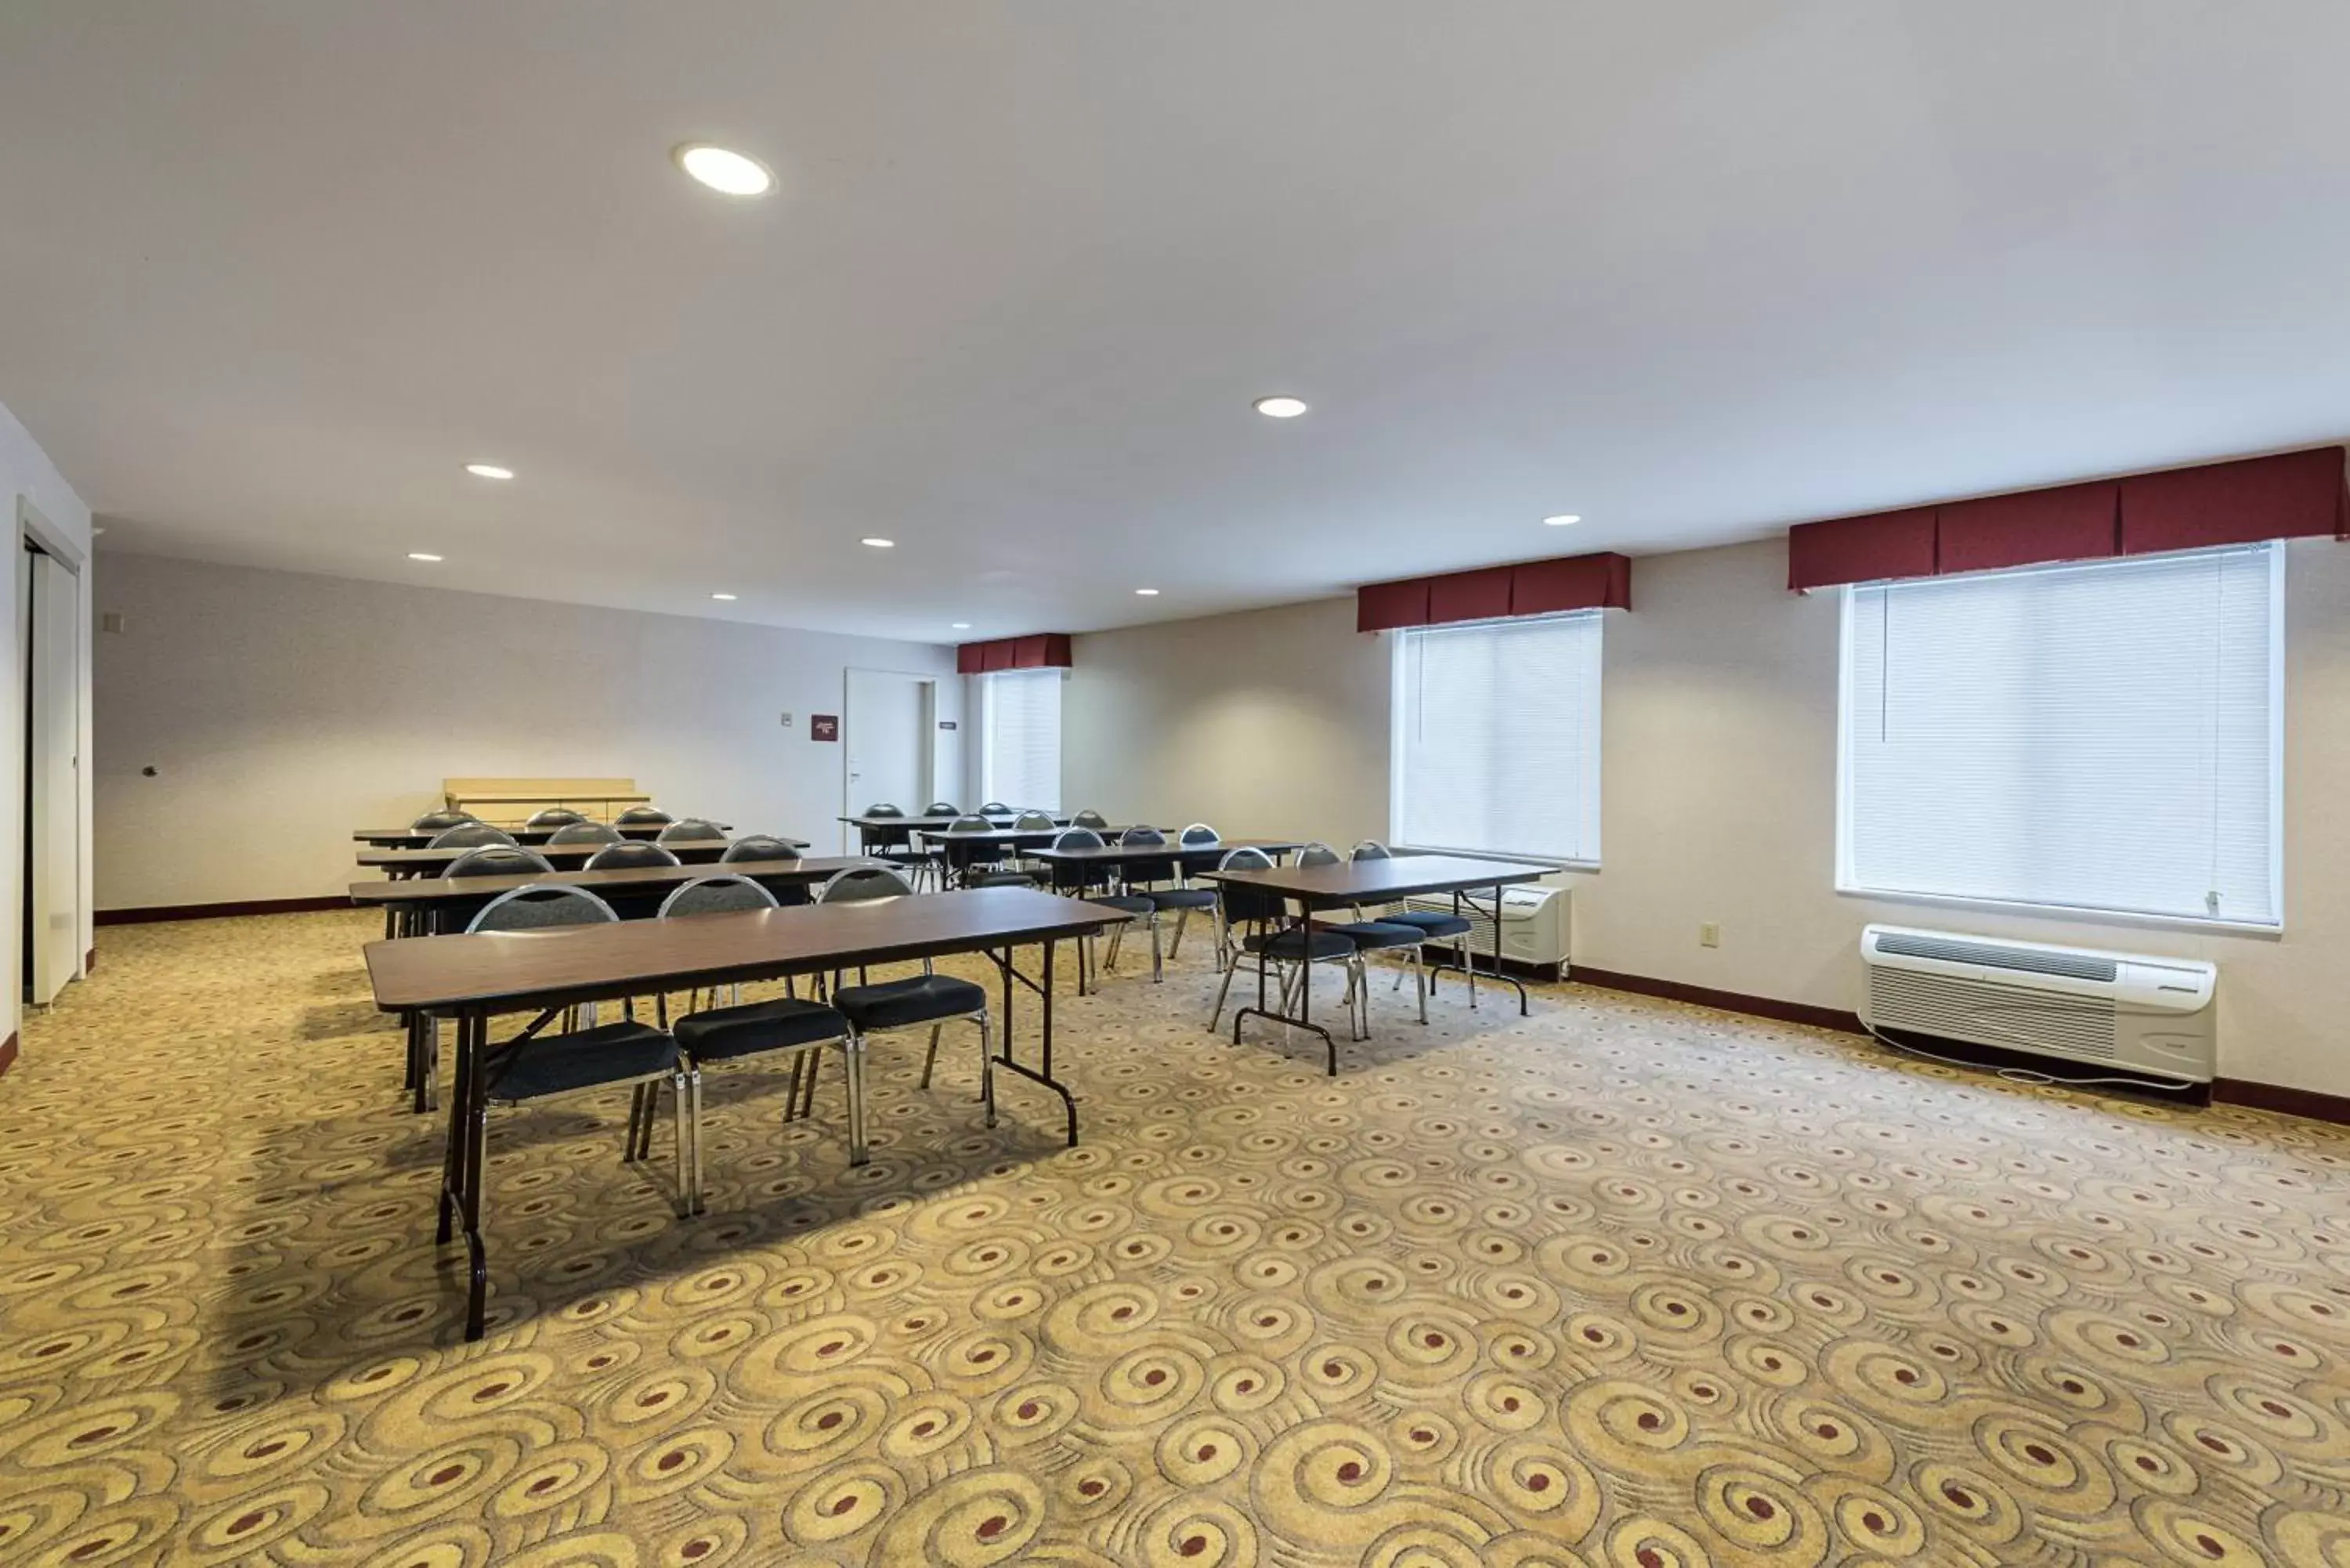 Meeting/conference room in Red Roof Inn Etowah – Athens, TN